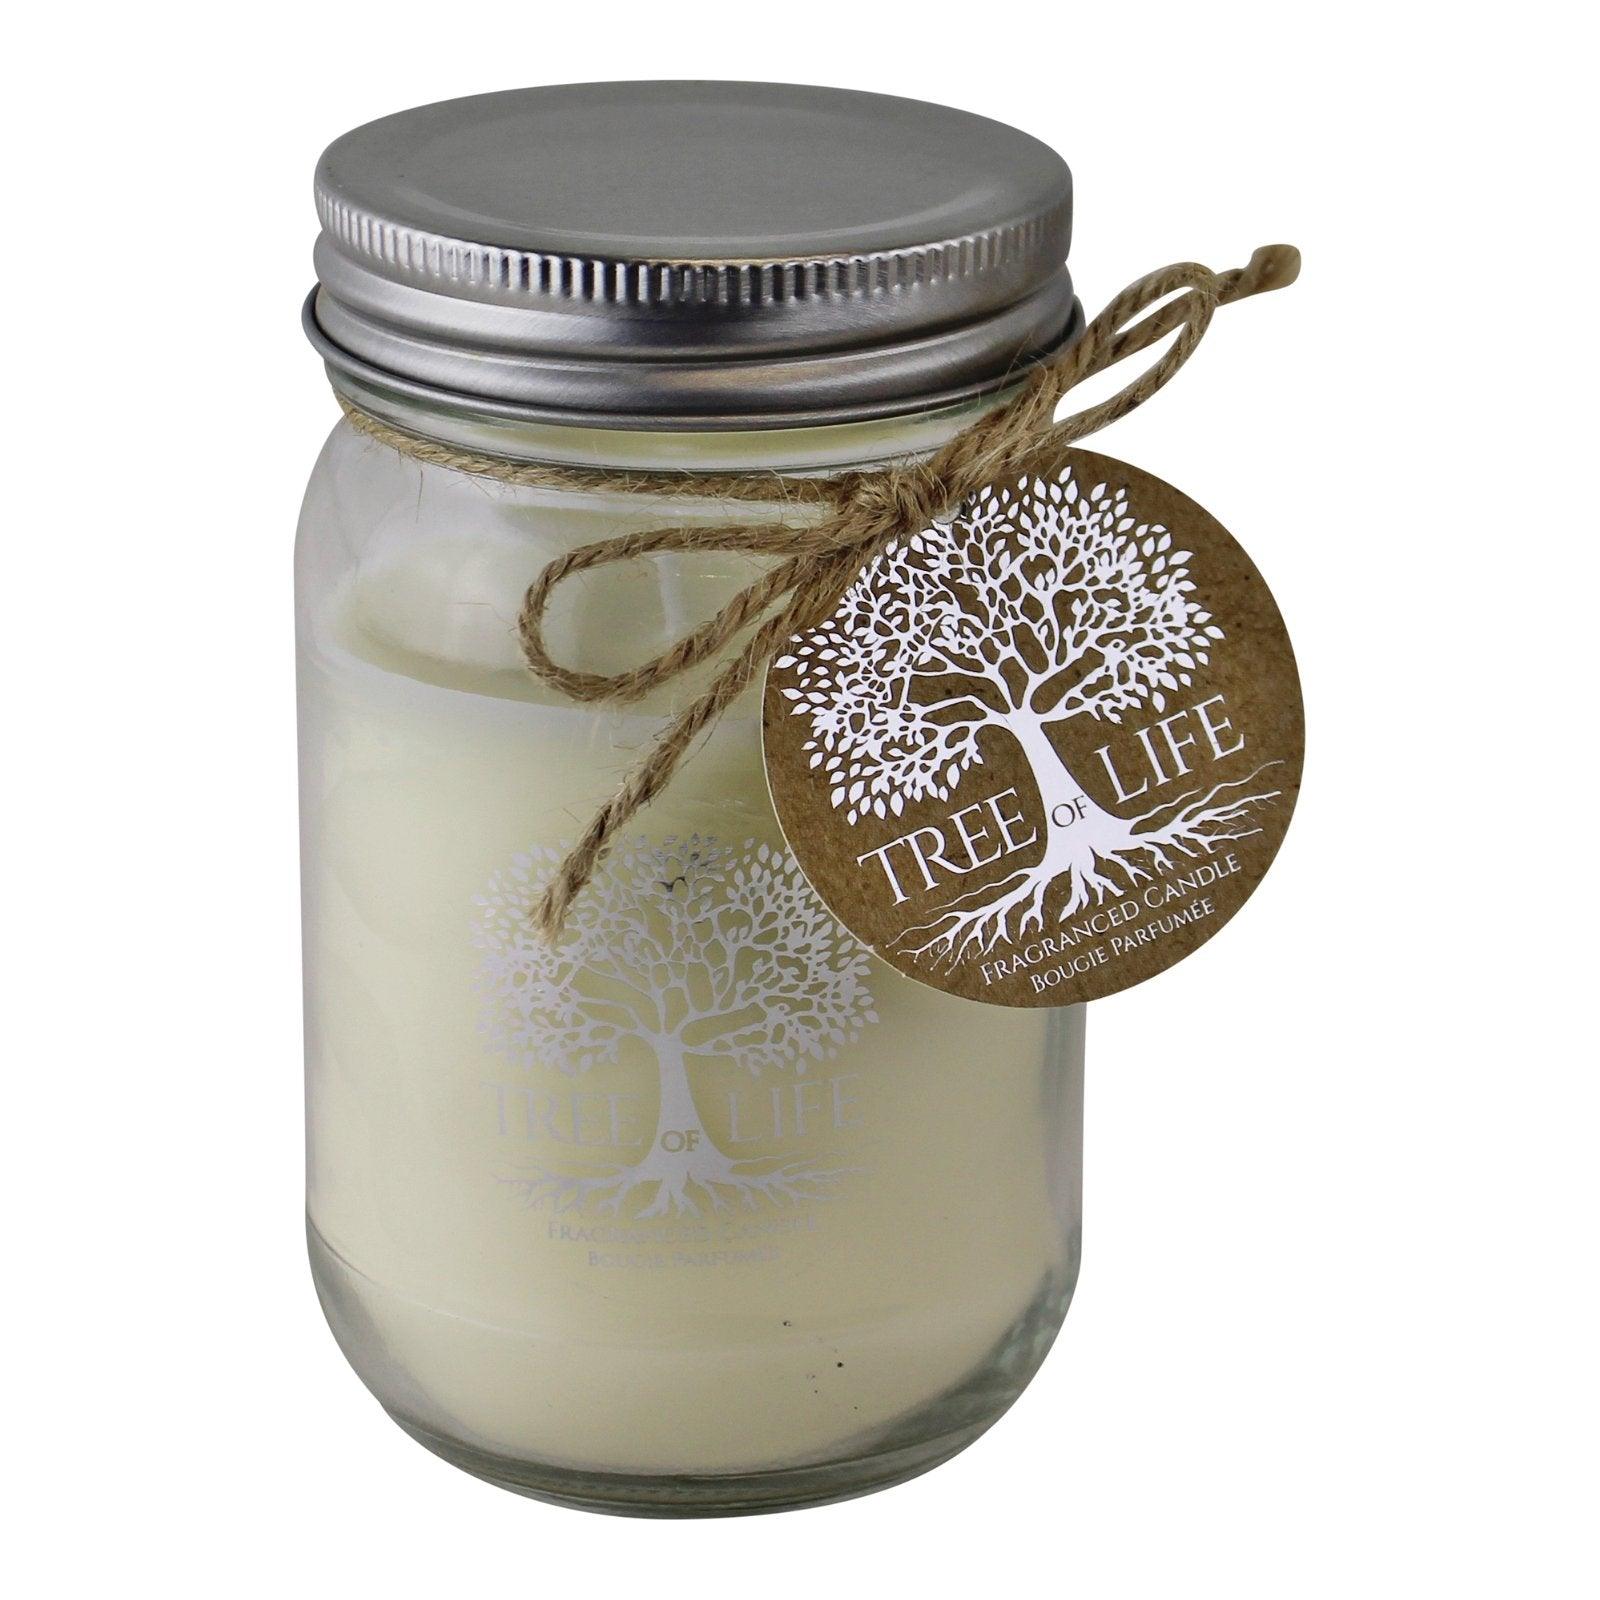 Tree Of Life Fragranced Candle In Glass Jar With Lid - £12.99 - Candles 